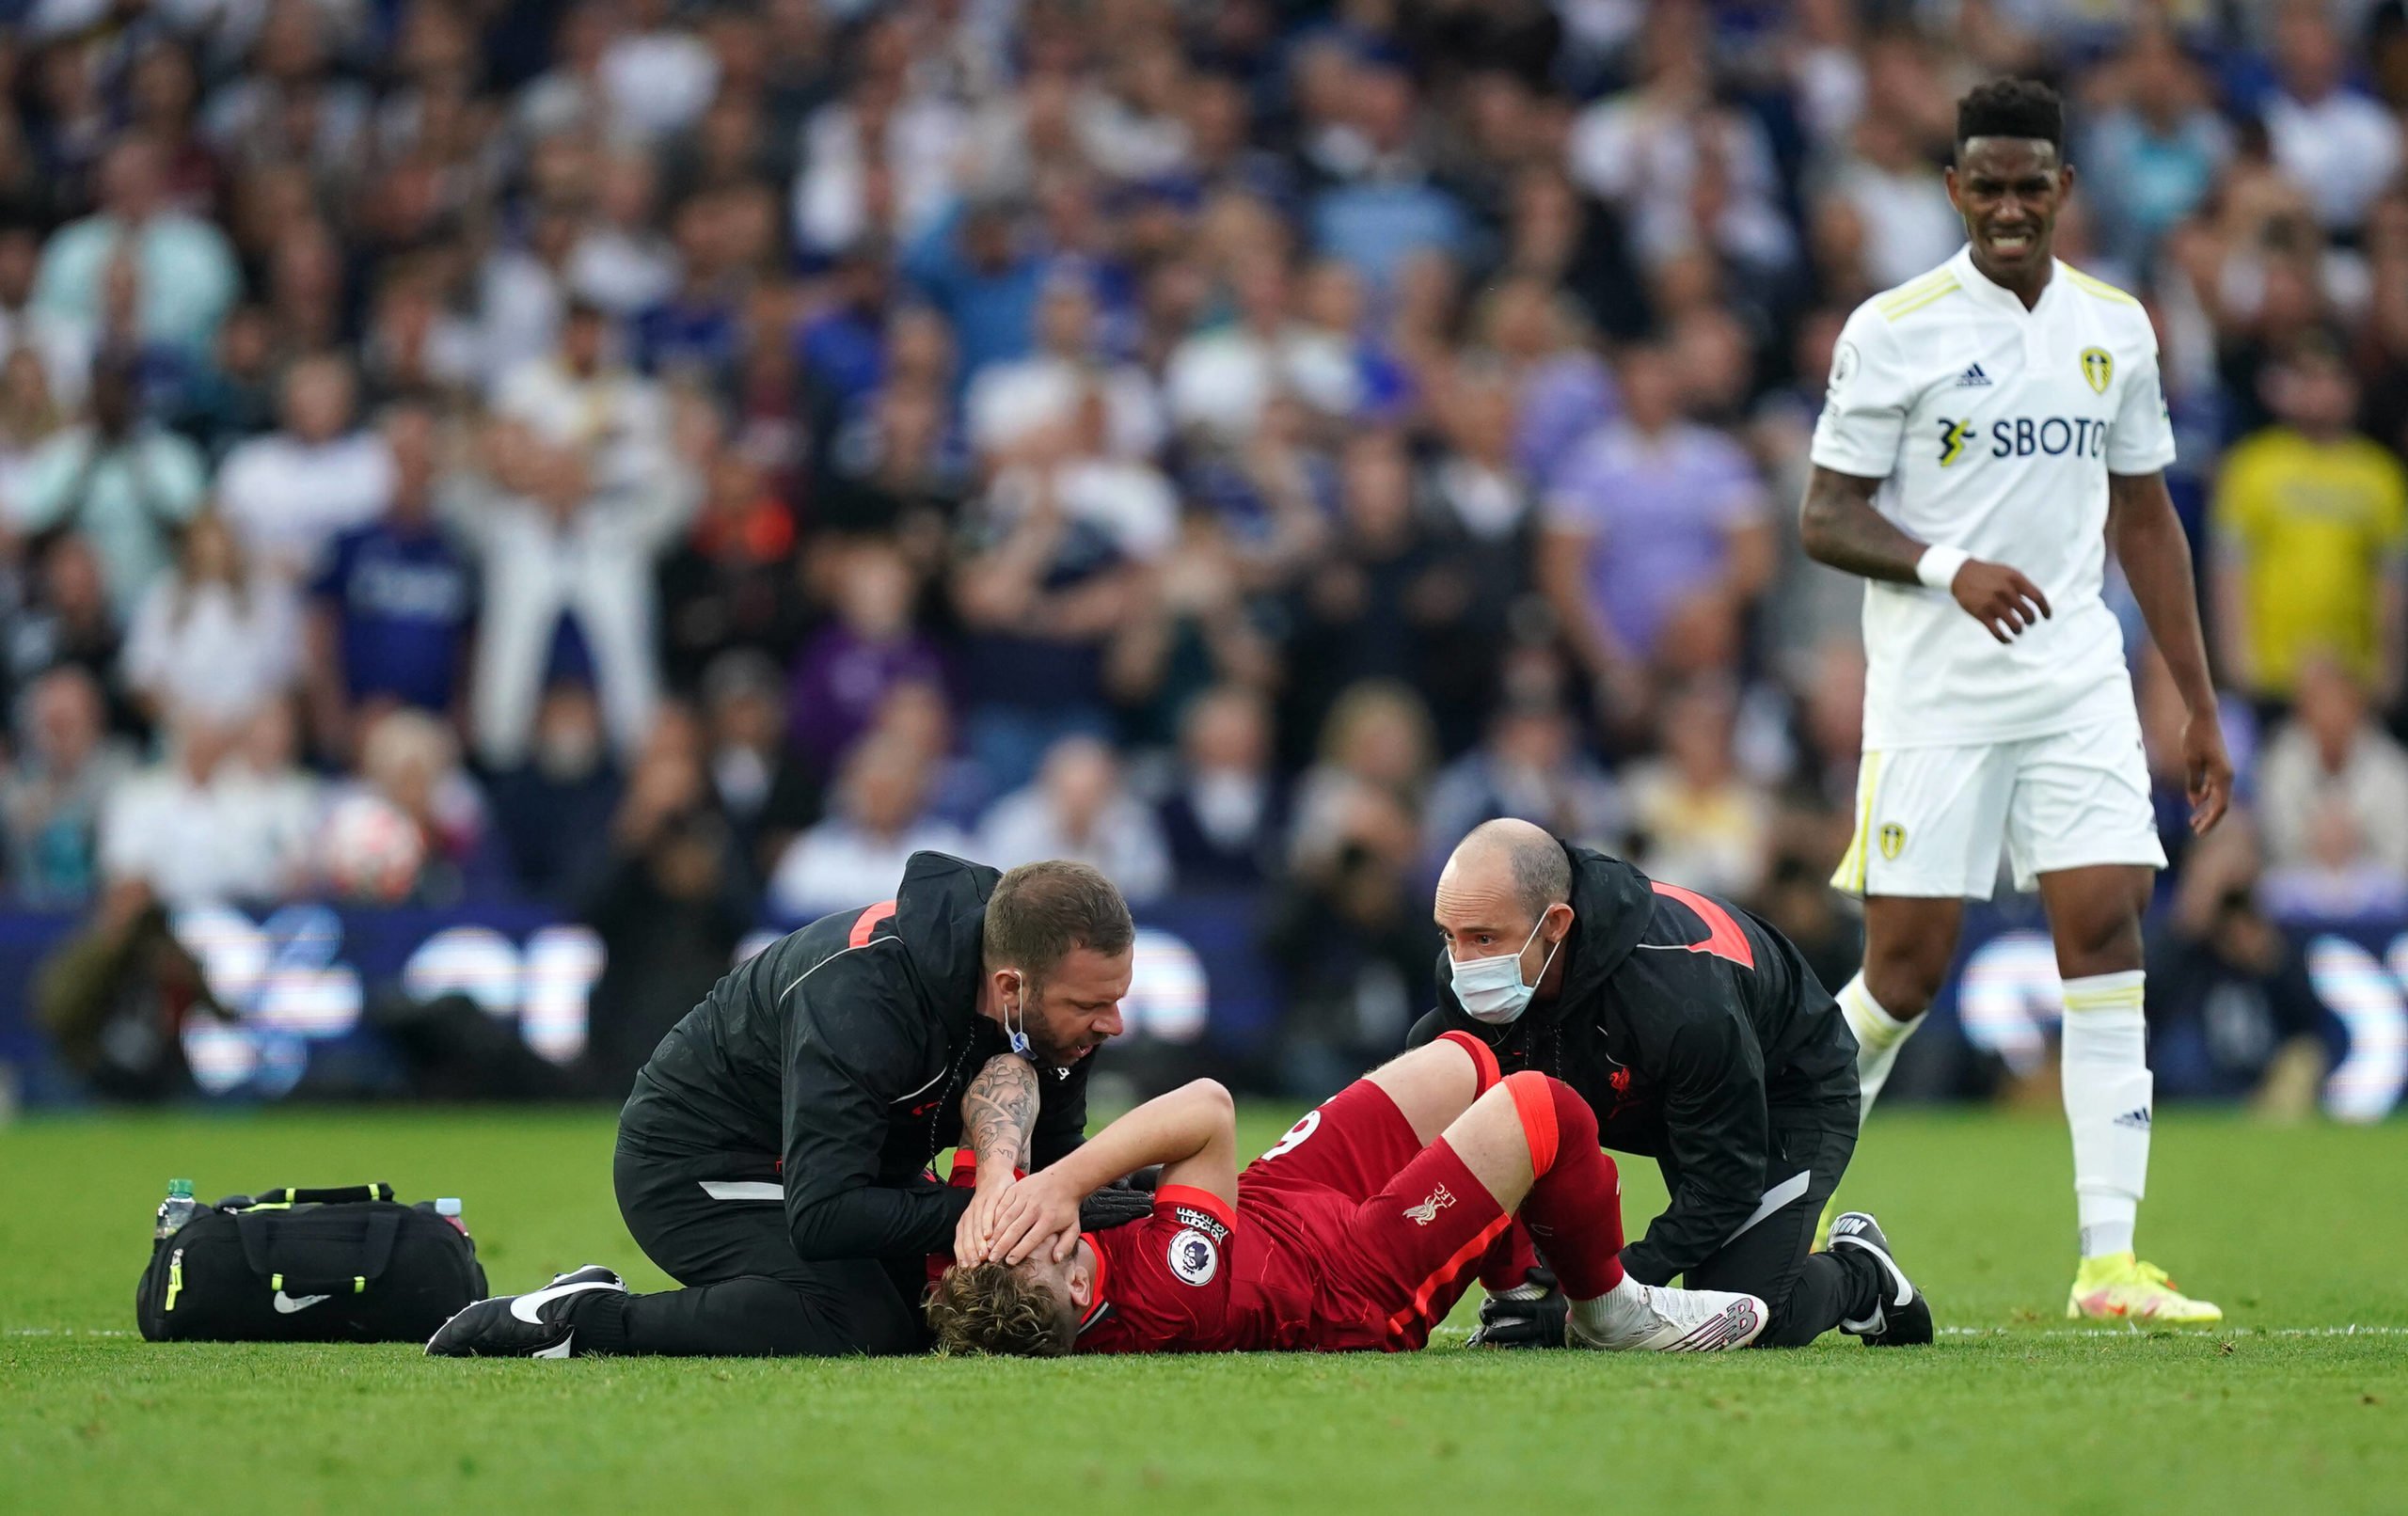 Liverpool teenager Harvey Elliott receiving treatment after suffering a horrible injury